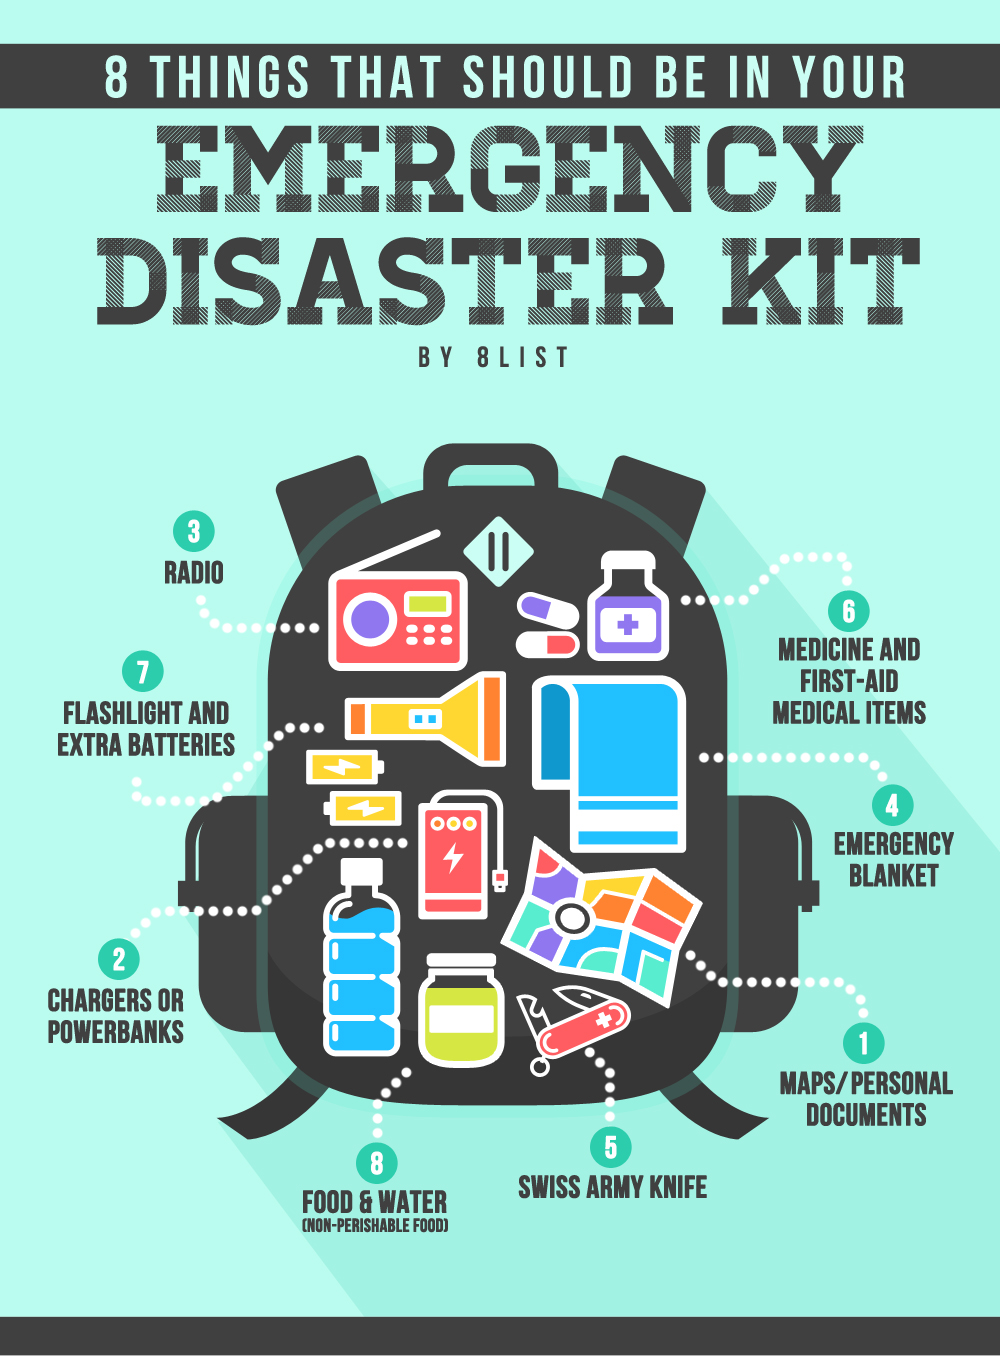 8-things-that-should-be-in-your-emergency-disaster-kit-8list-ph